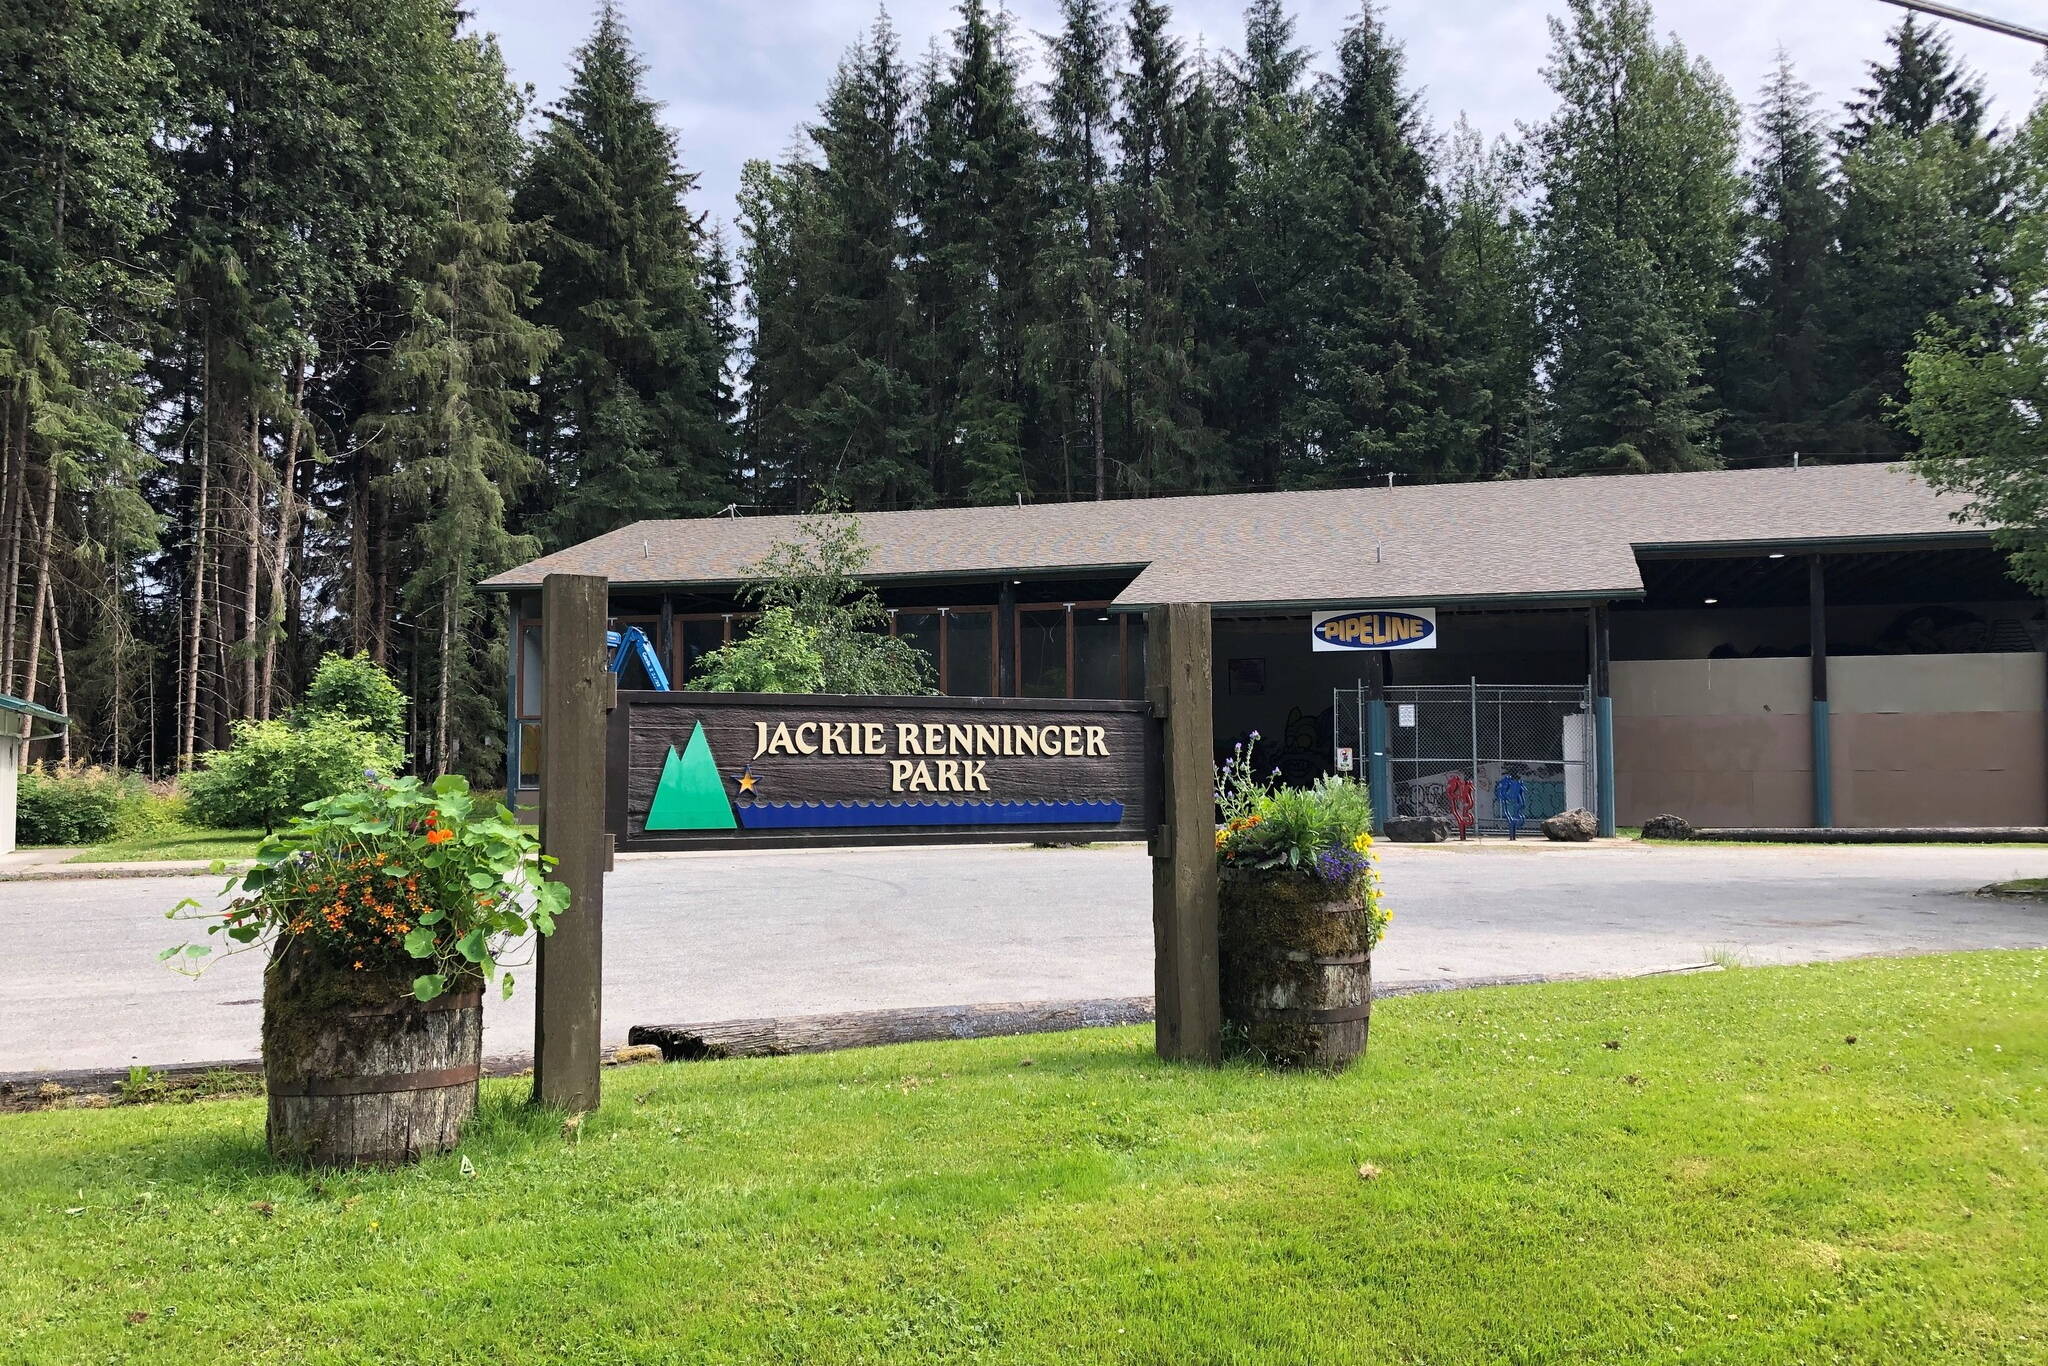 Jackie Renninger Park, which is scheduled to receive structural and safety improvements. (City and Borough of Juneau photo)